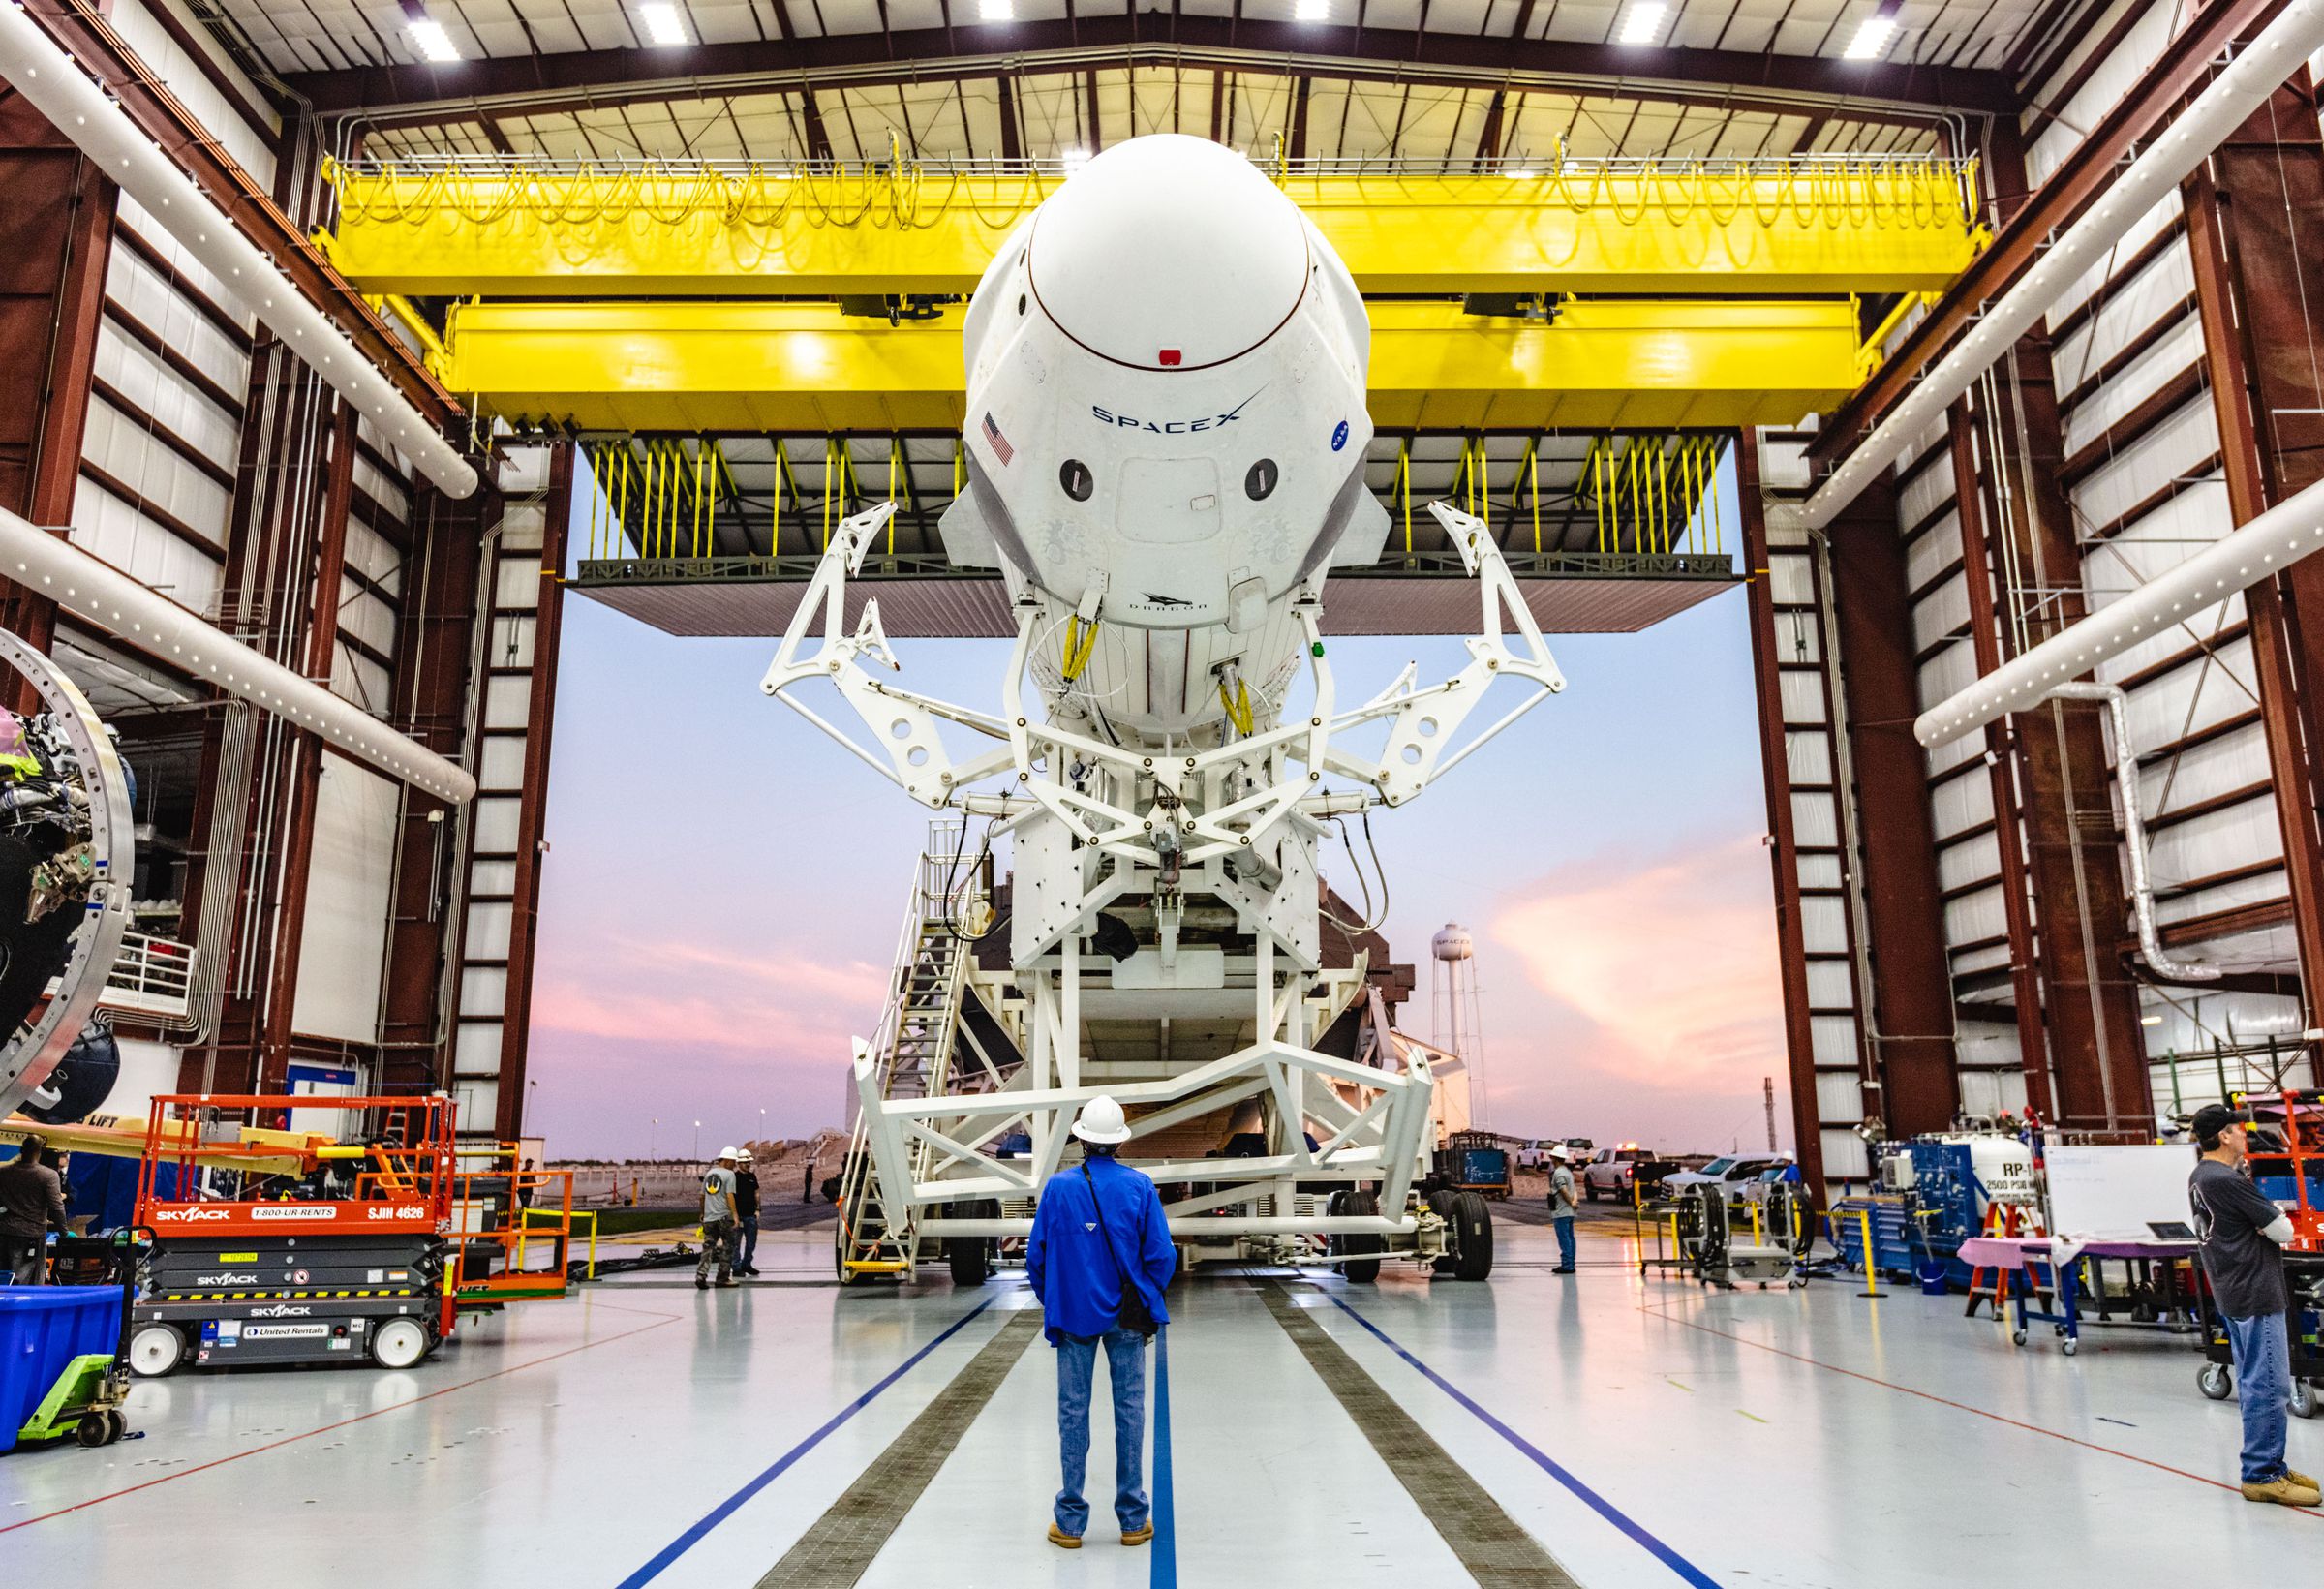 The Crew Dragon in SpaceX’s hangar at Cape Canaveral, Florida.